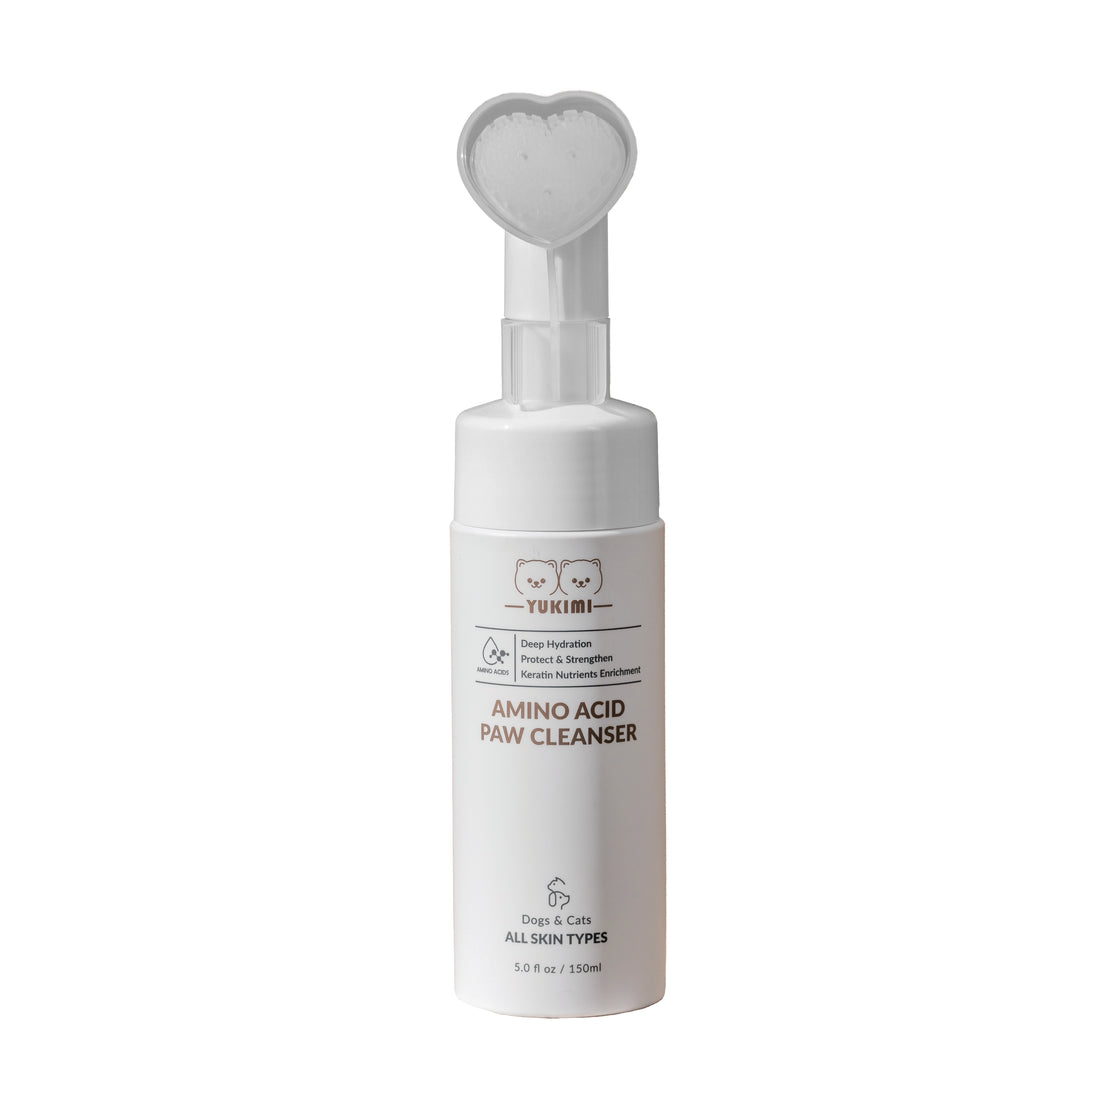 Amino Acid Paw Cleanser (Heart-Shaped)